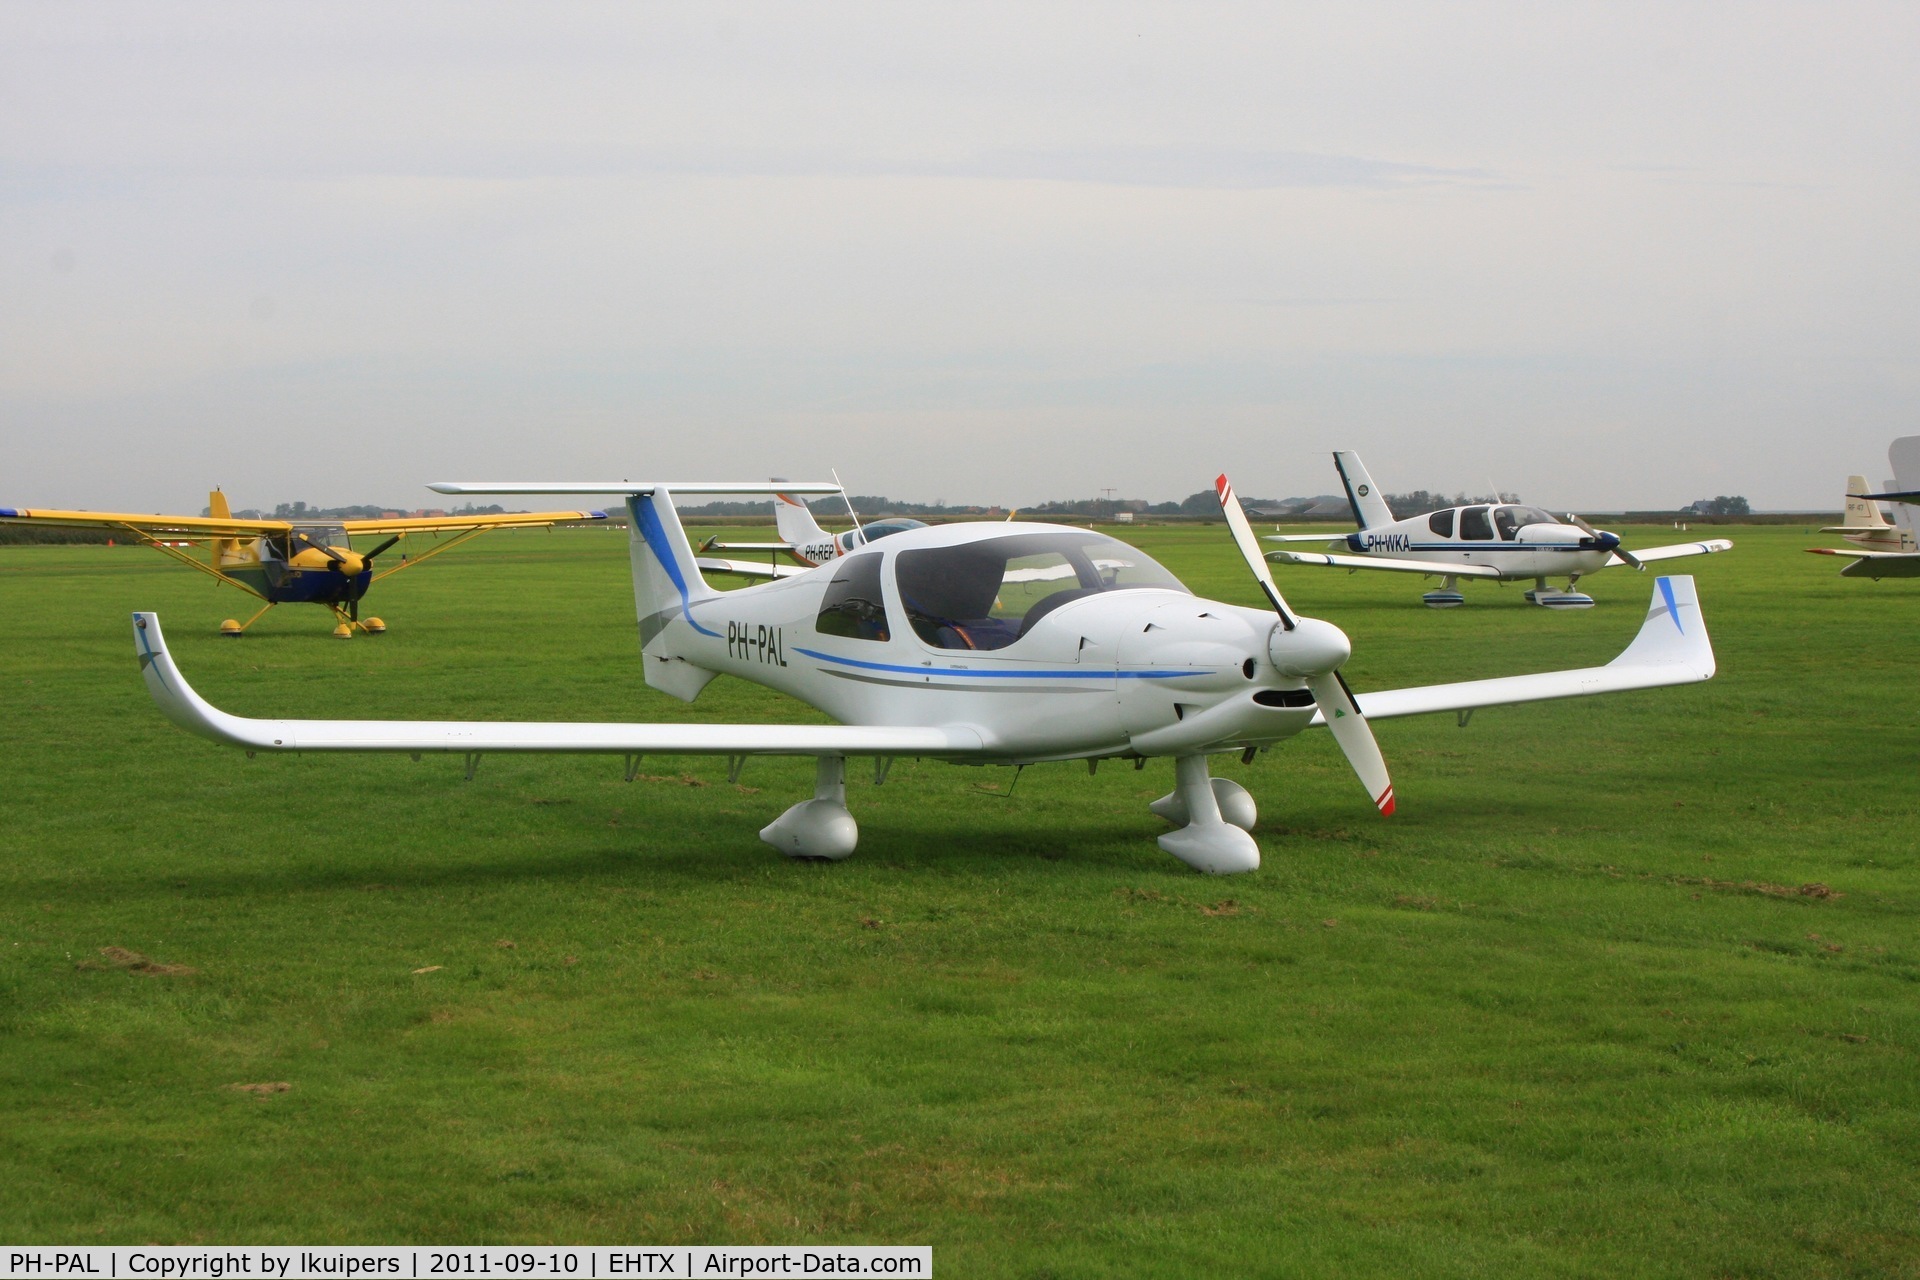 PH-PAL, Dyn'Aero S MCR-4S 2002 C/N 04, At the 3rd Light Aircraft Fly-in on Texel Airport in September 2011